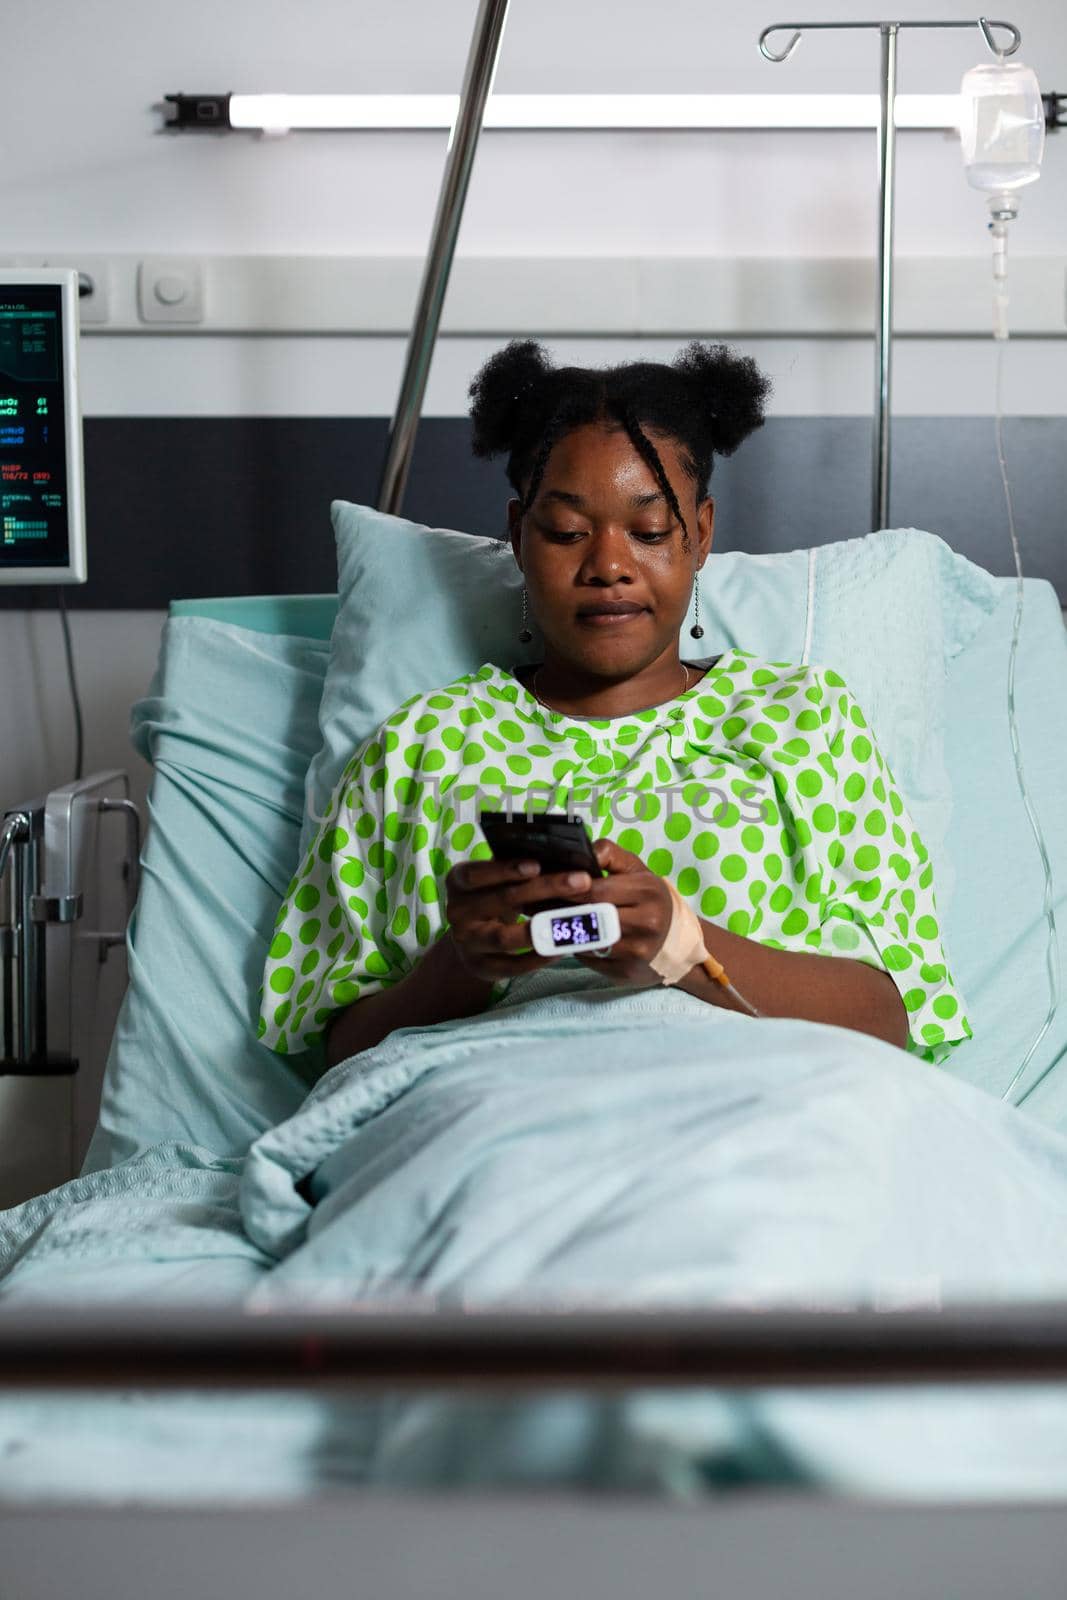 Young african american adult sitting in hospital ward bed using smartphone for web surfing and communication. Teenager patient waiting on medicine and consultation while having online gadget